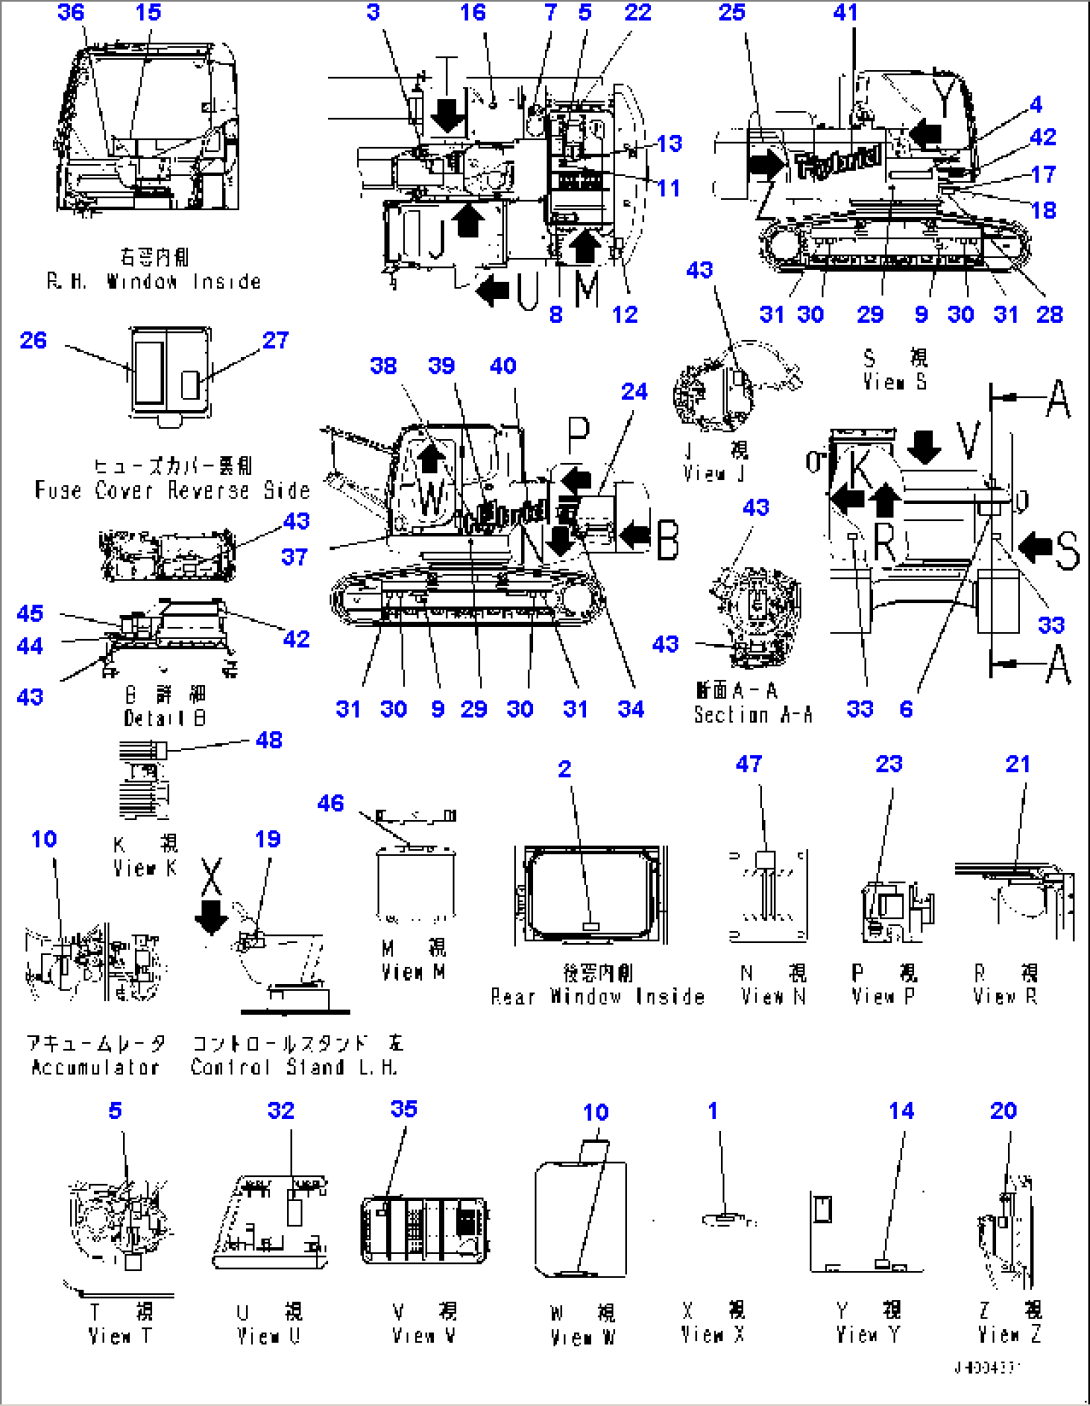 Marks and Name Plates, Portuguese